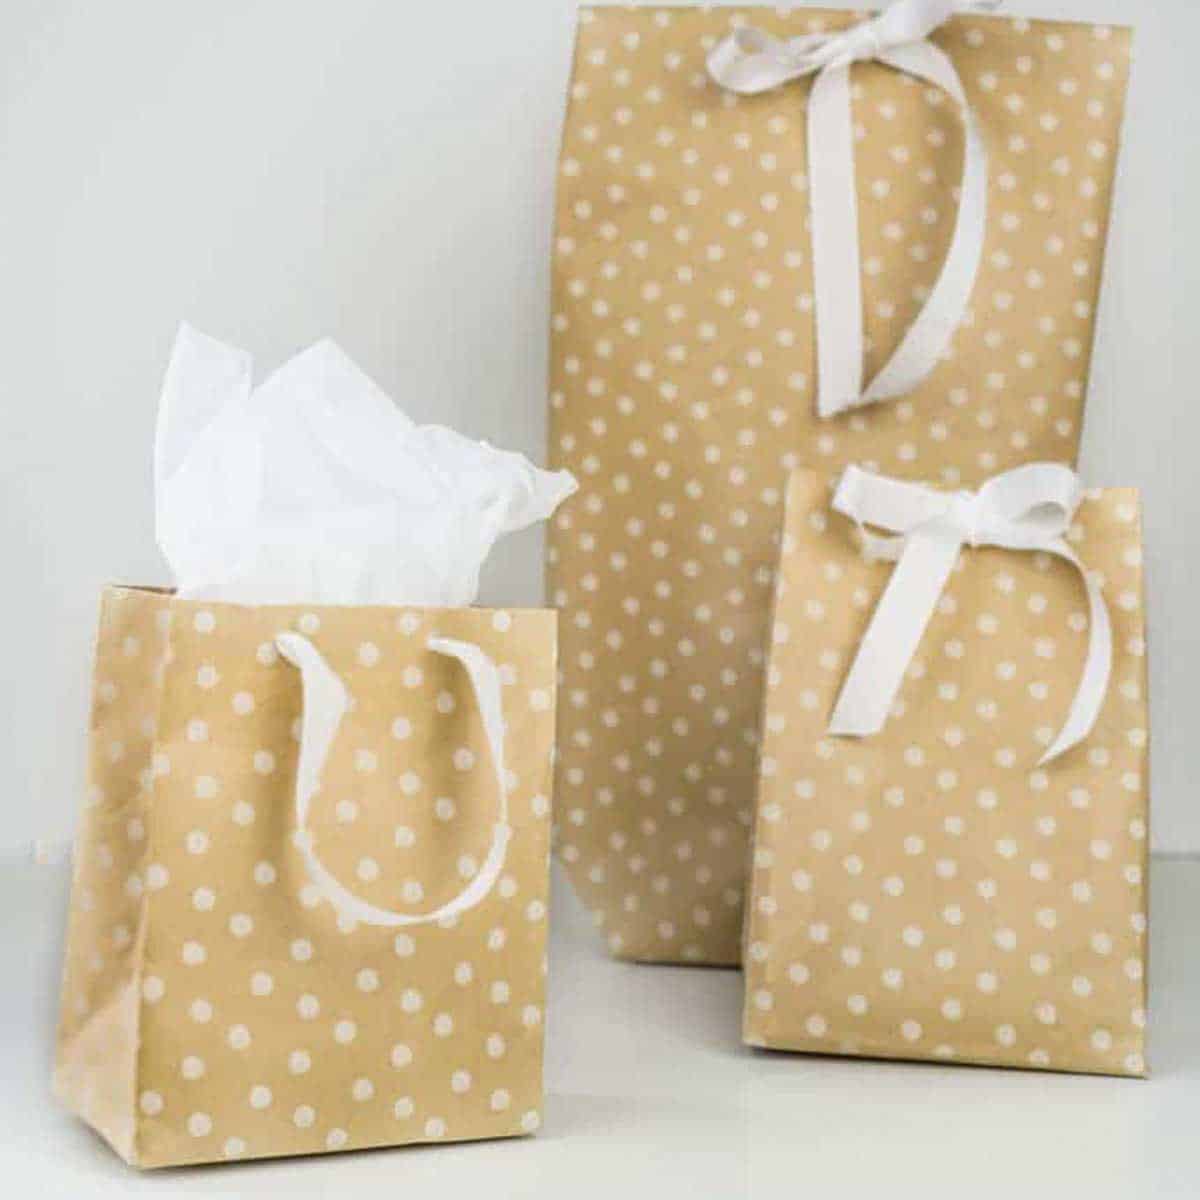 Easy Gift Wrapping | DIY Gift Packing Idea | Gift Wrap for any Occasion  #giftwrap - YouTube